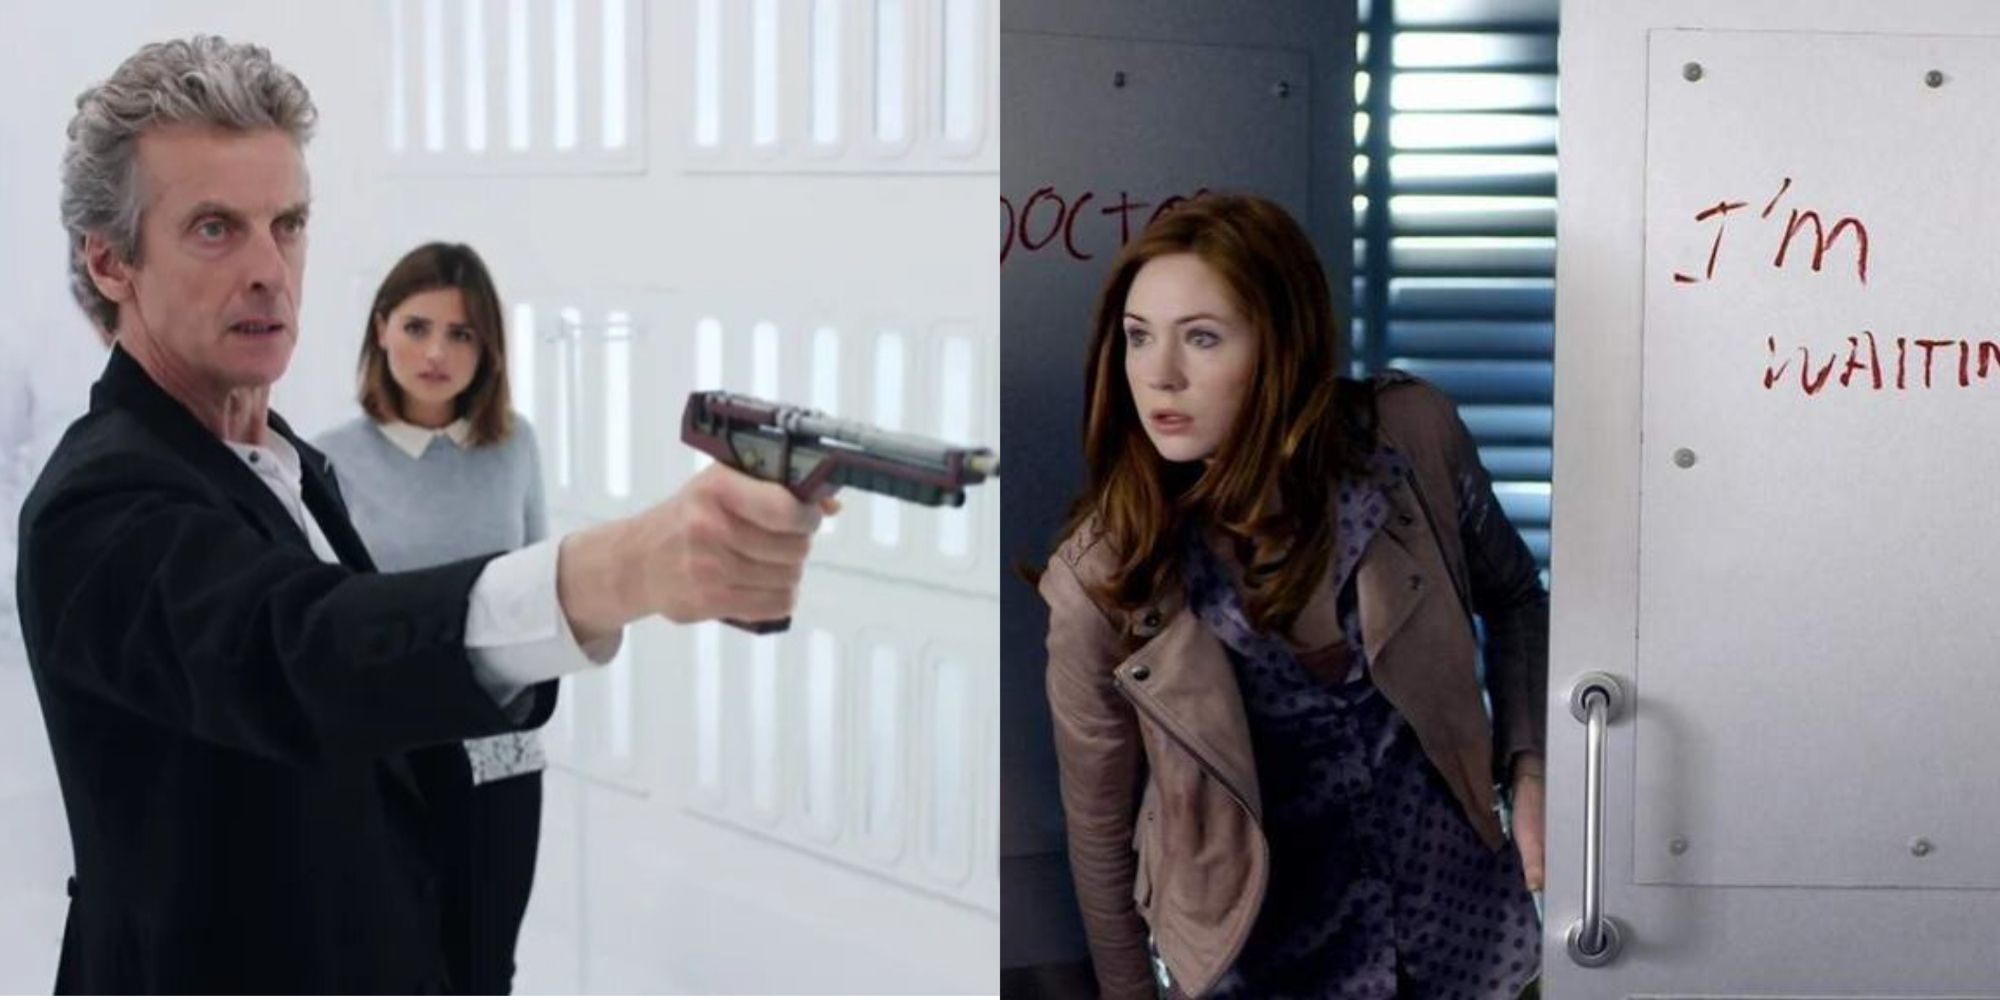 The Twelfth Doctor aims a gun at Amy.